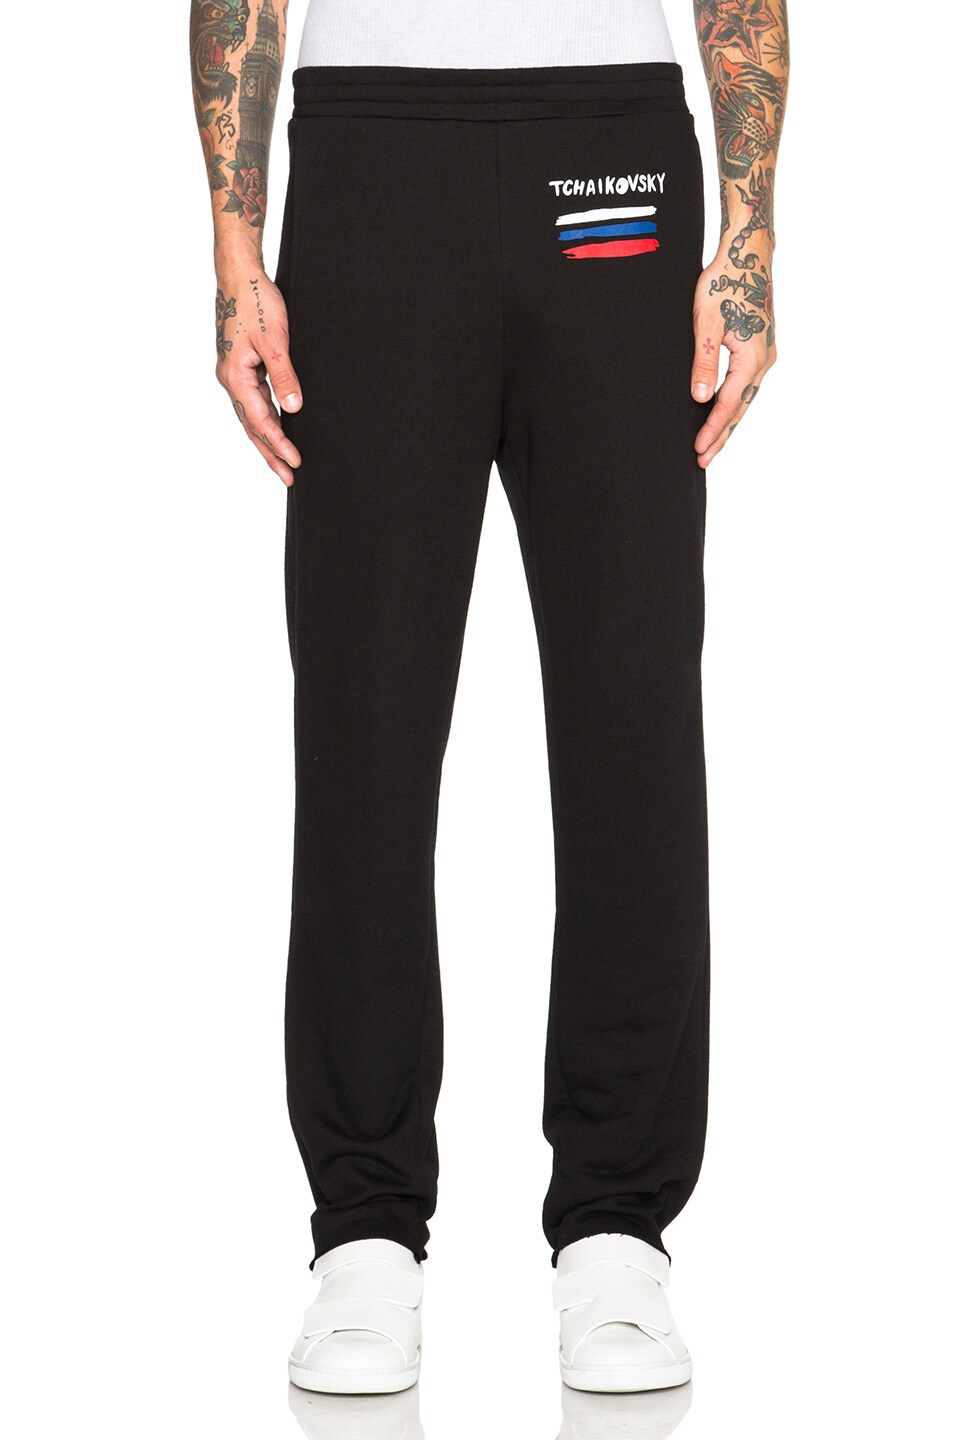 Image 1 of Opening Ceremony Tchaikovsky Cut Off Sweatpants in Black Multi